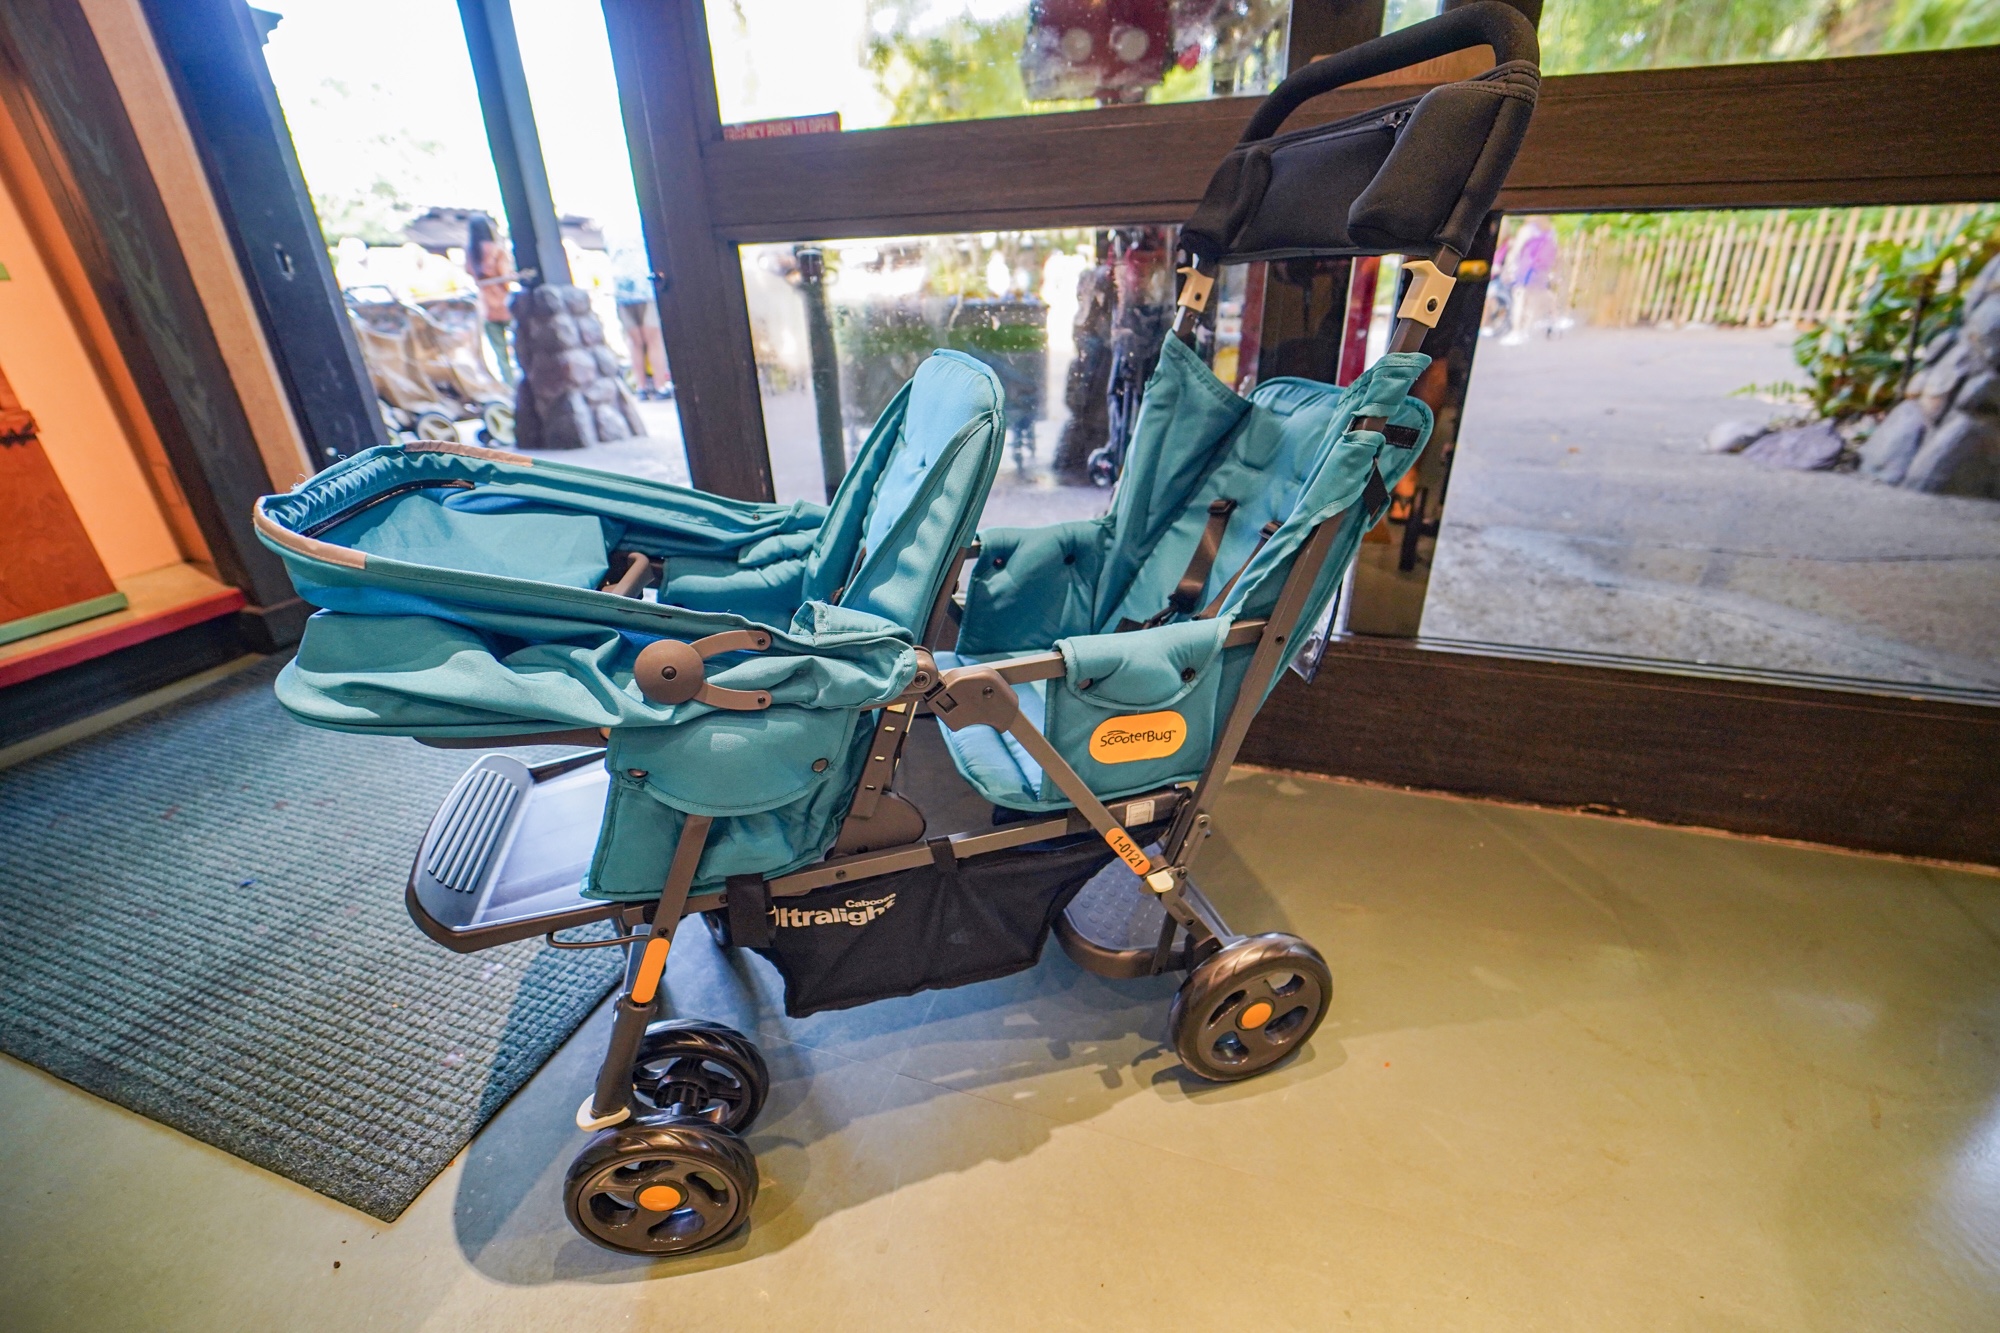 how much to rent a stroller at disneyland